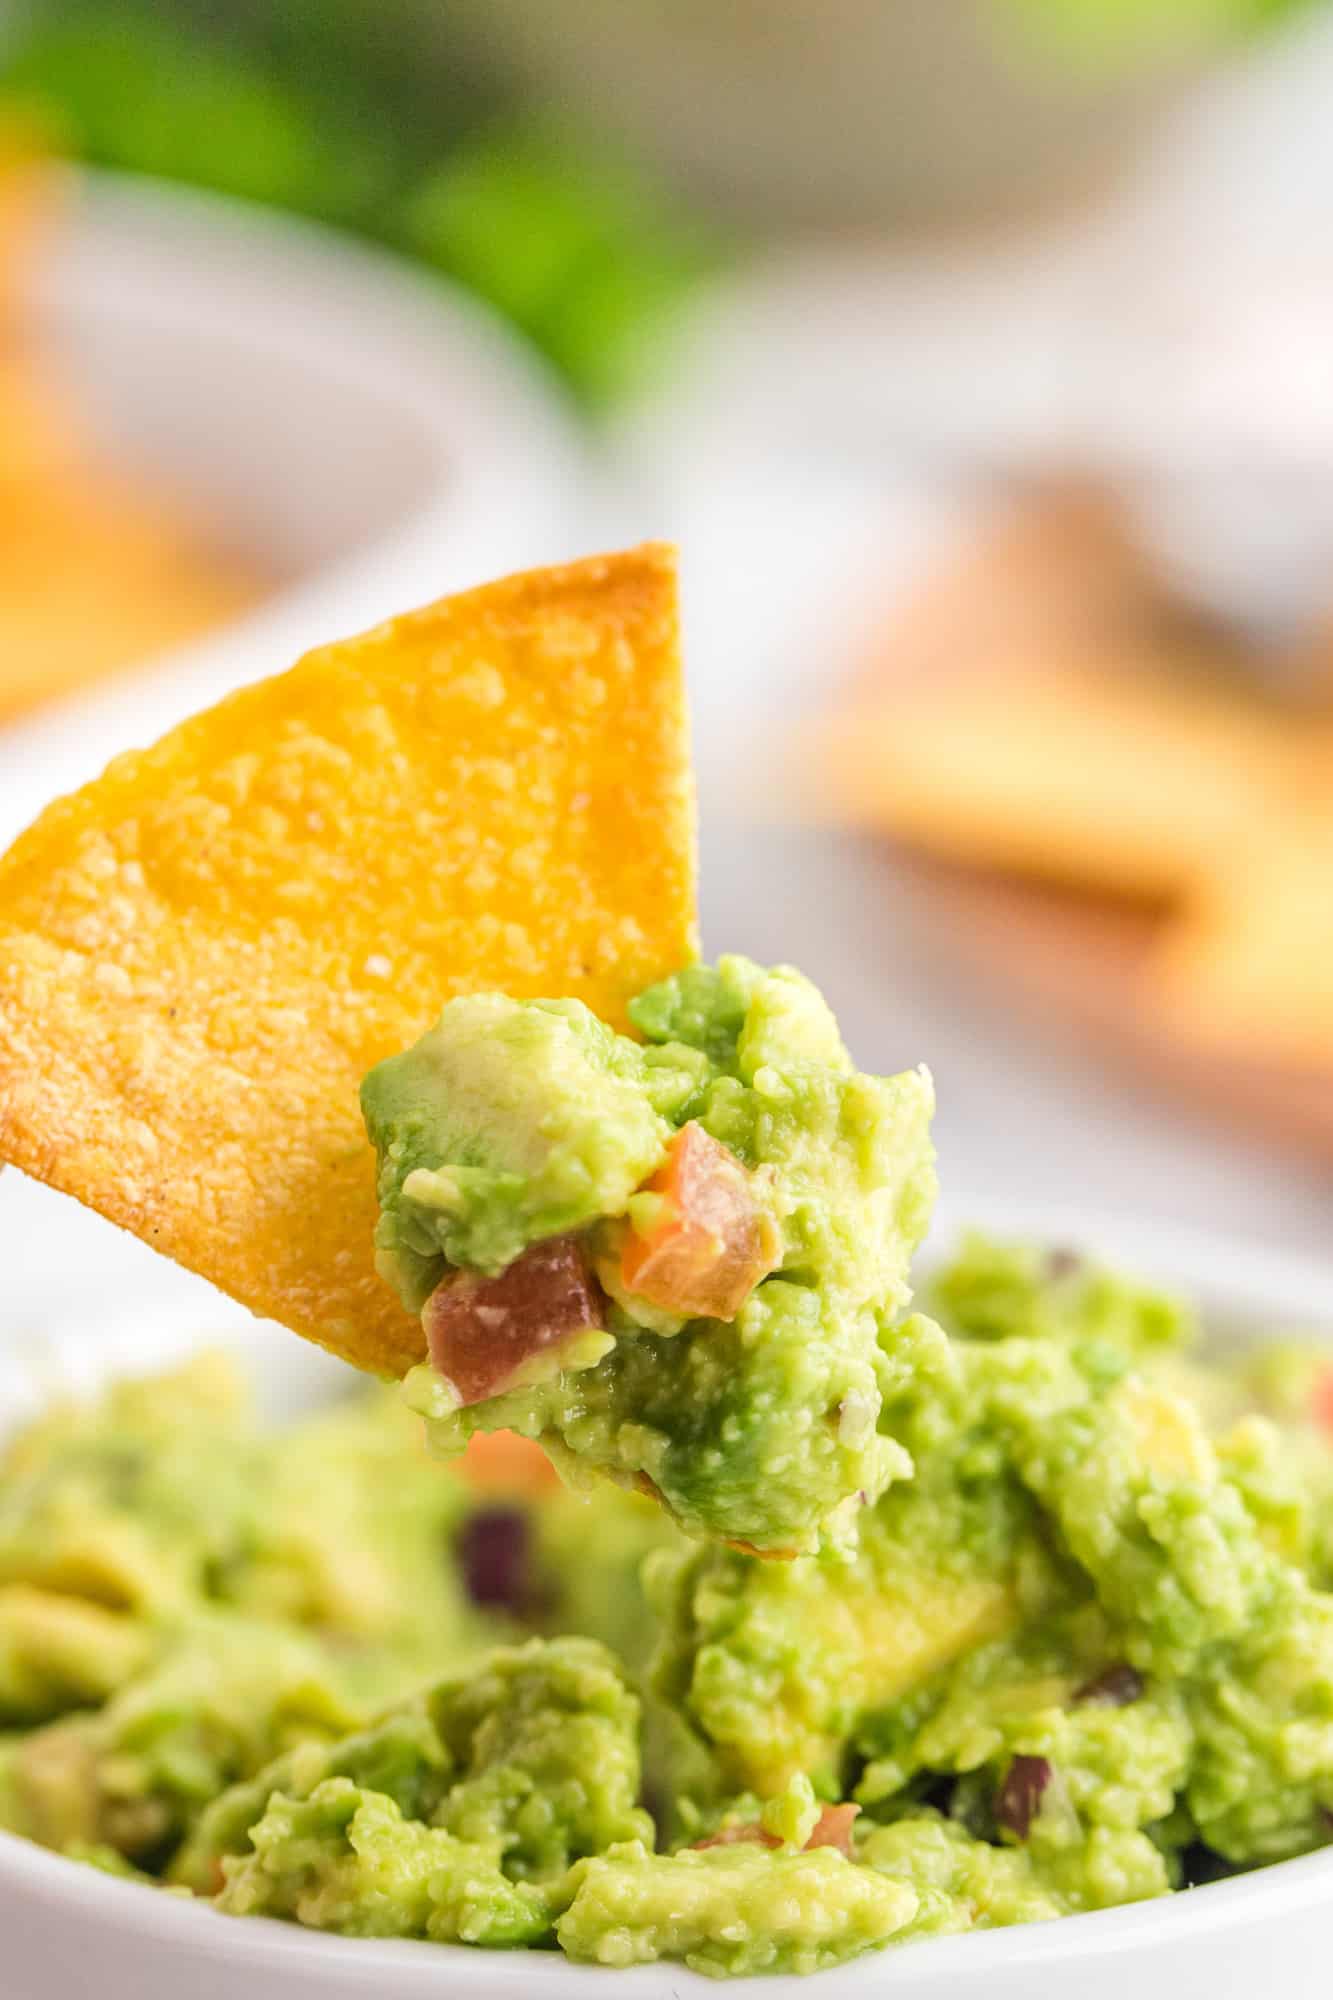 Homemade tortilla chip being dipped in guacamole.